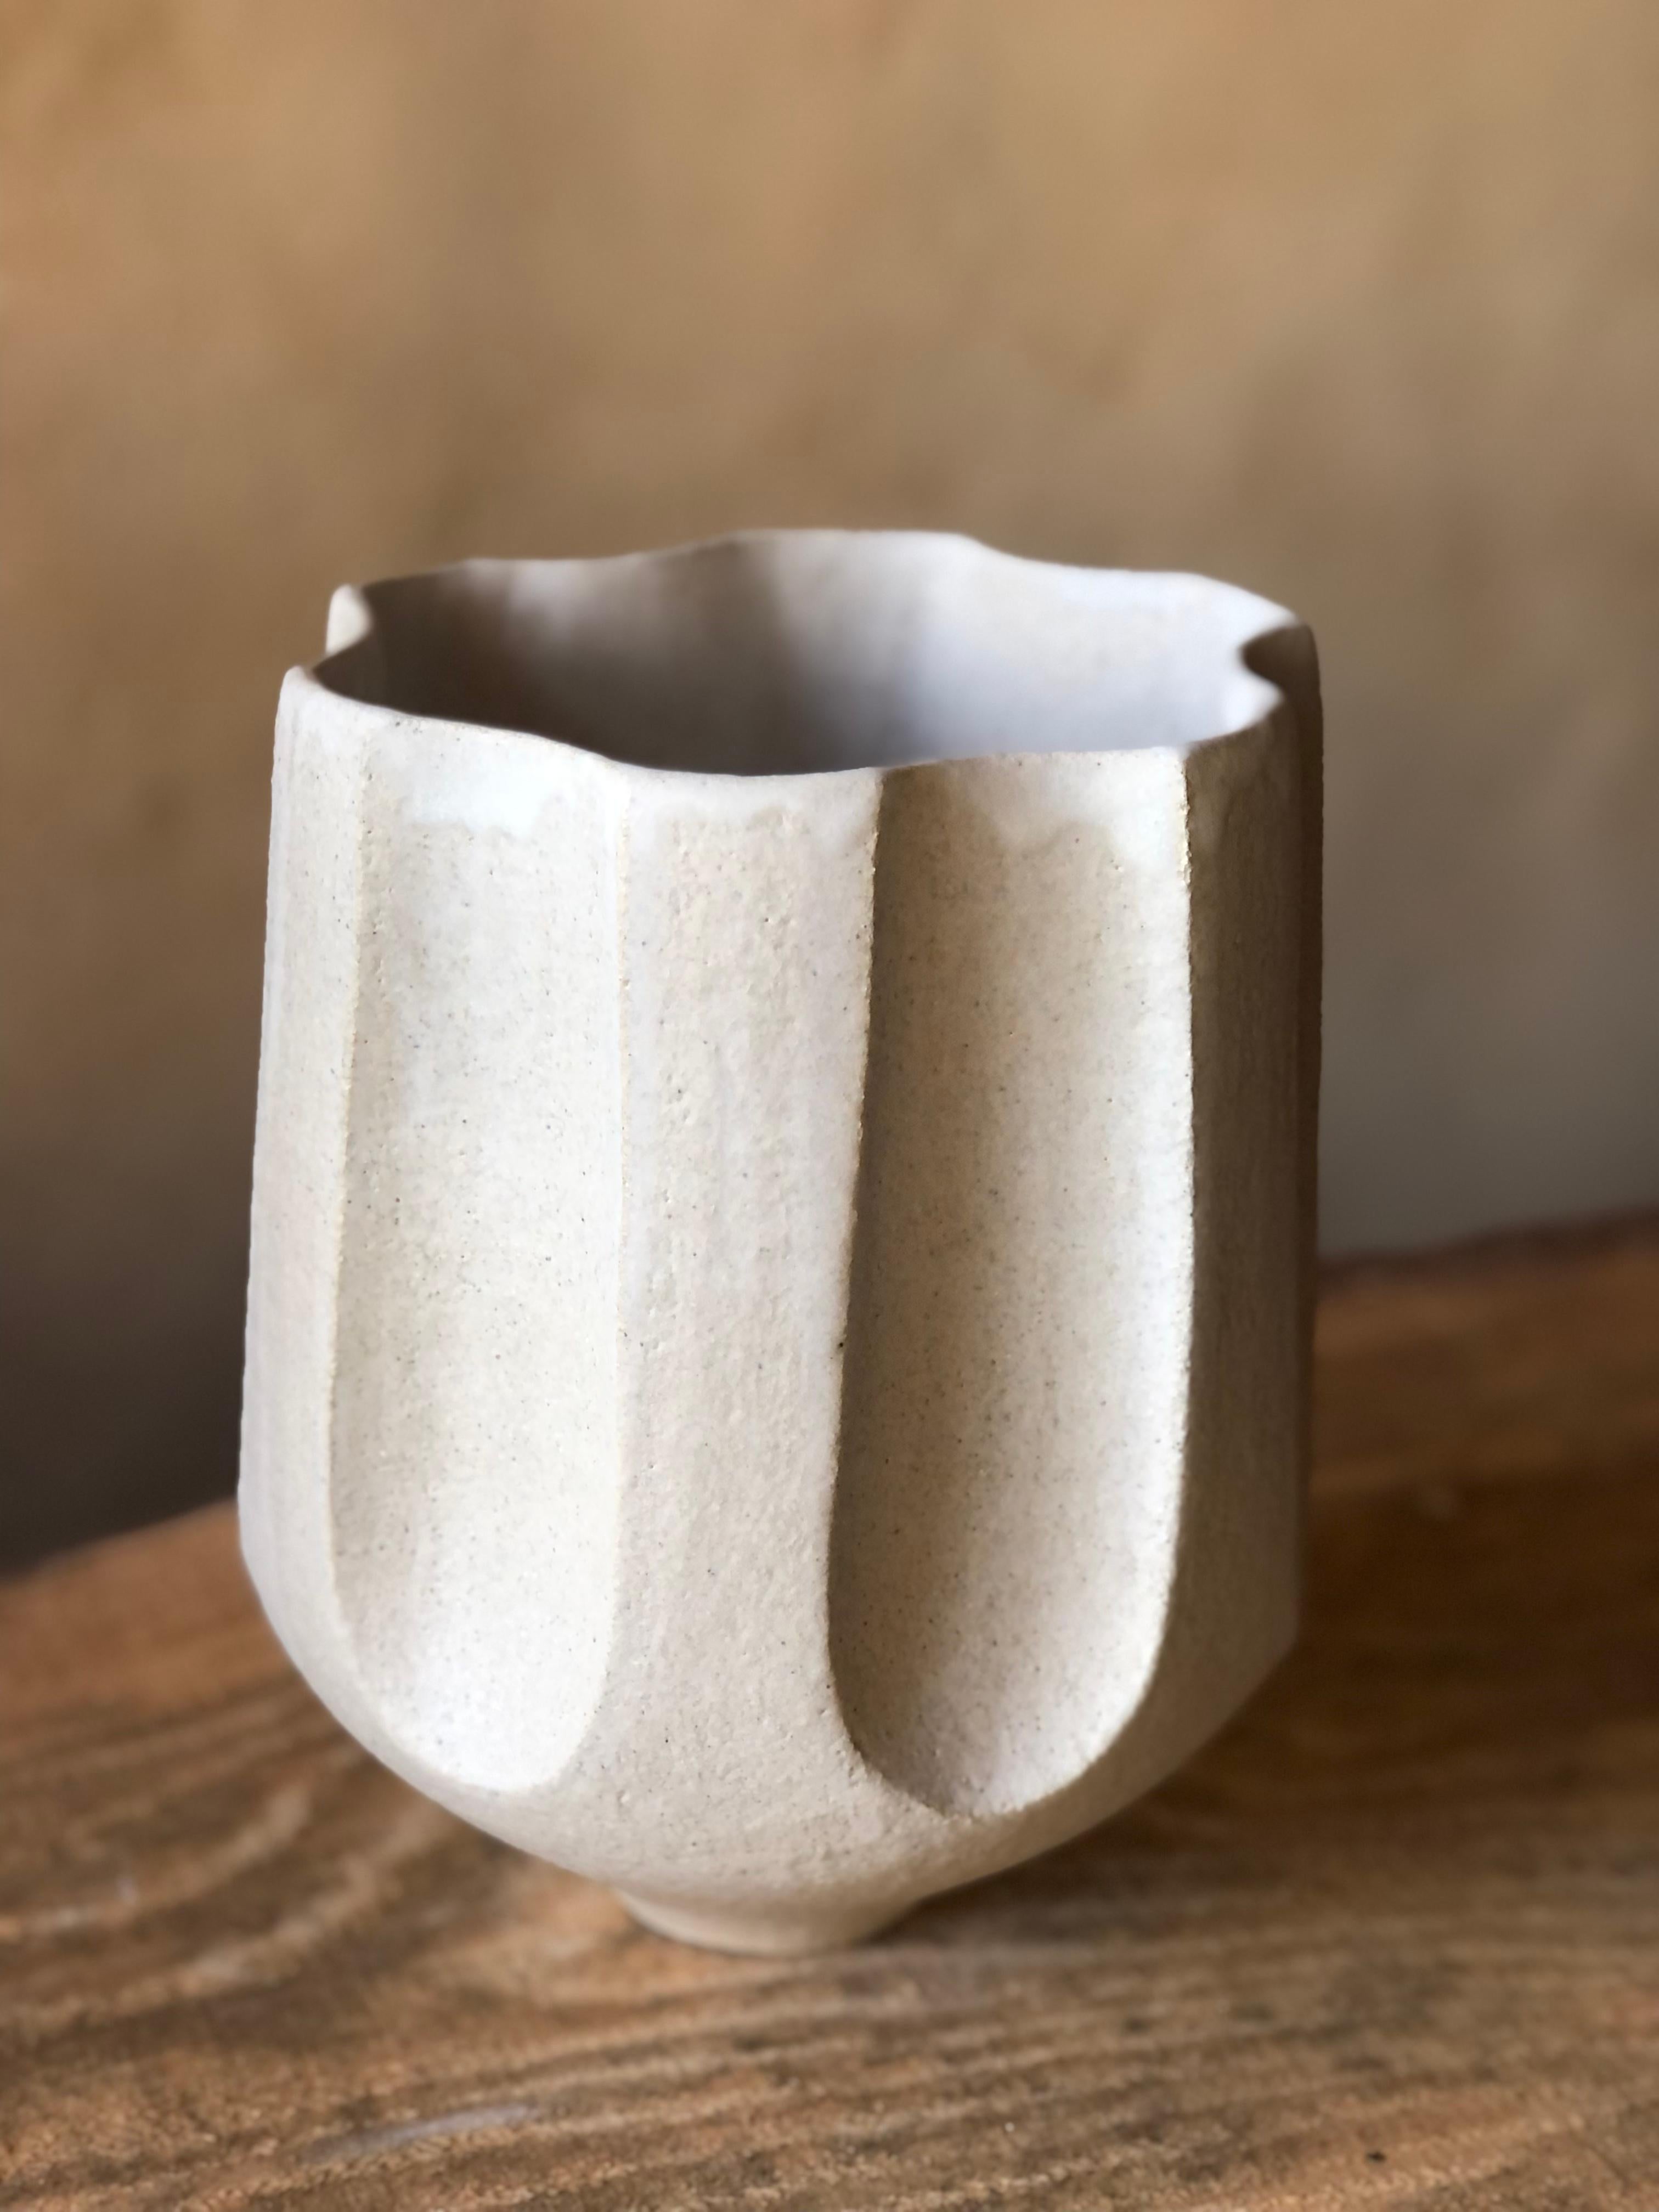 Multi Facetted Vase With White Crackle Glaze by Sophie Vaidie
One Of A Kind.
Dimensions: Ø 18 x H 24 cm. 
Materials: Stoneware with white mat glaze.

In the beginning, there was a need to make, with the hands, the touch, the senses. Then came the